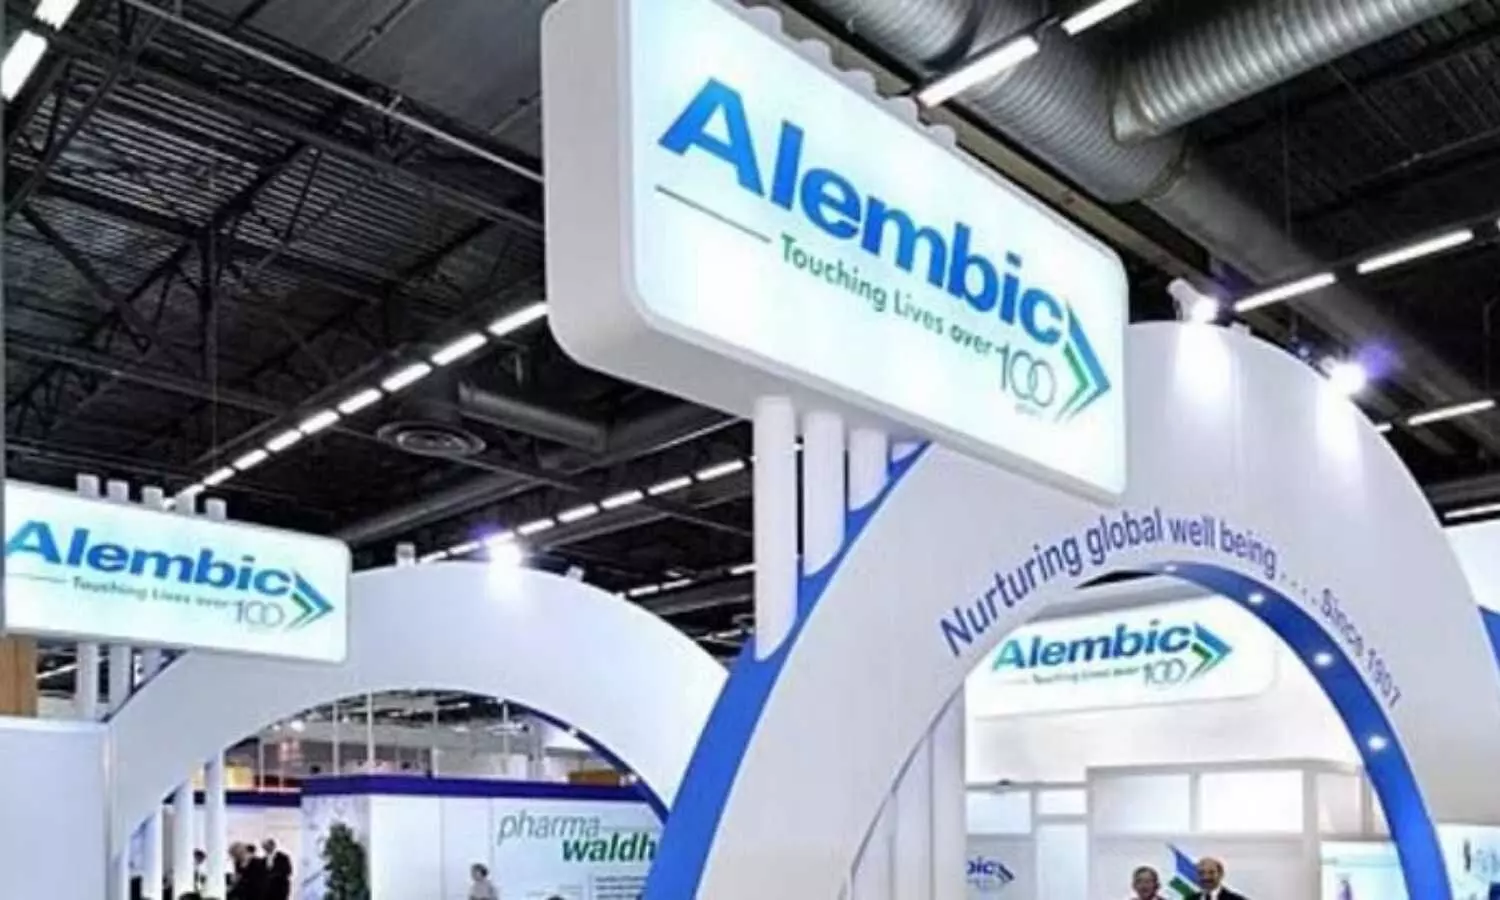 Alembic Pharma Vadodara facility concludes USFDA inspection with zero observations